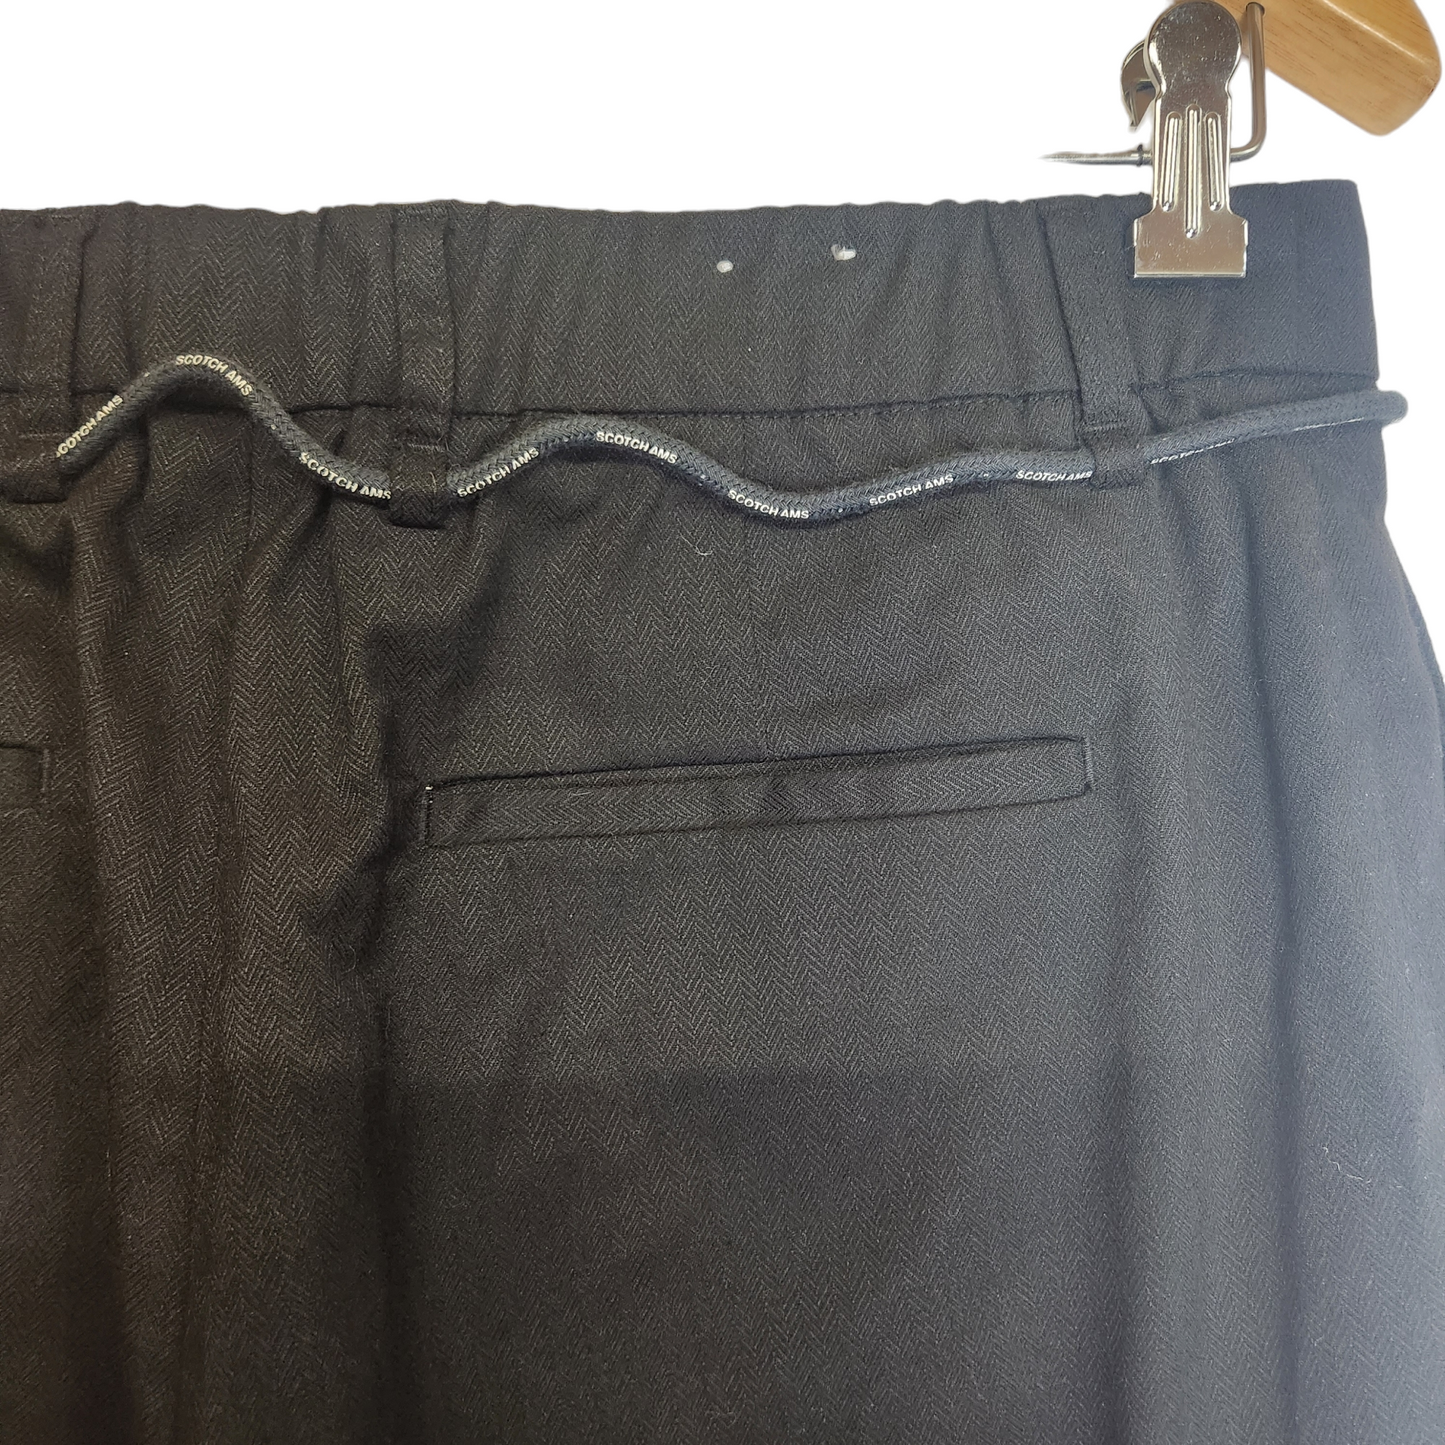 Scotch and Soda Twilt Tappered Fit Trousers Black - Size 31 x 32